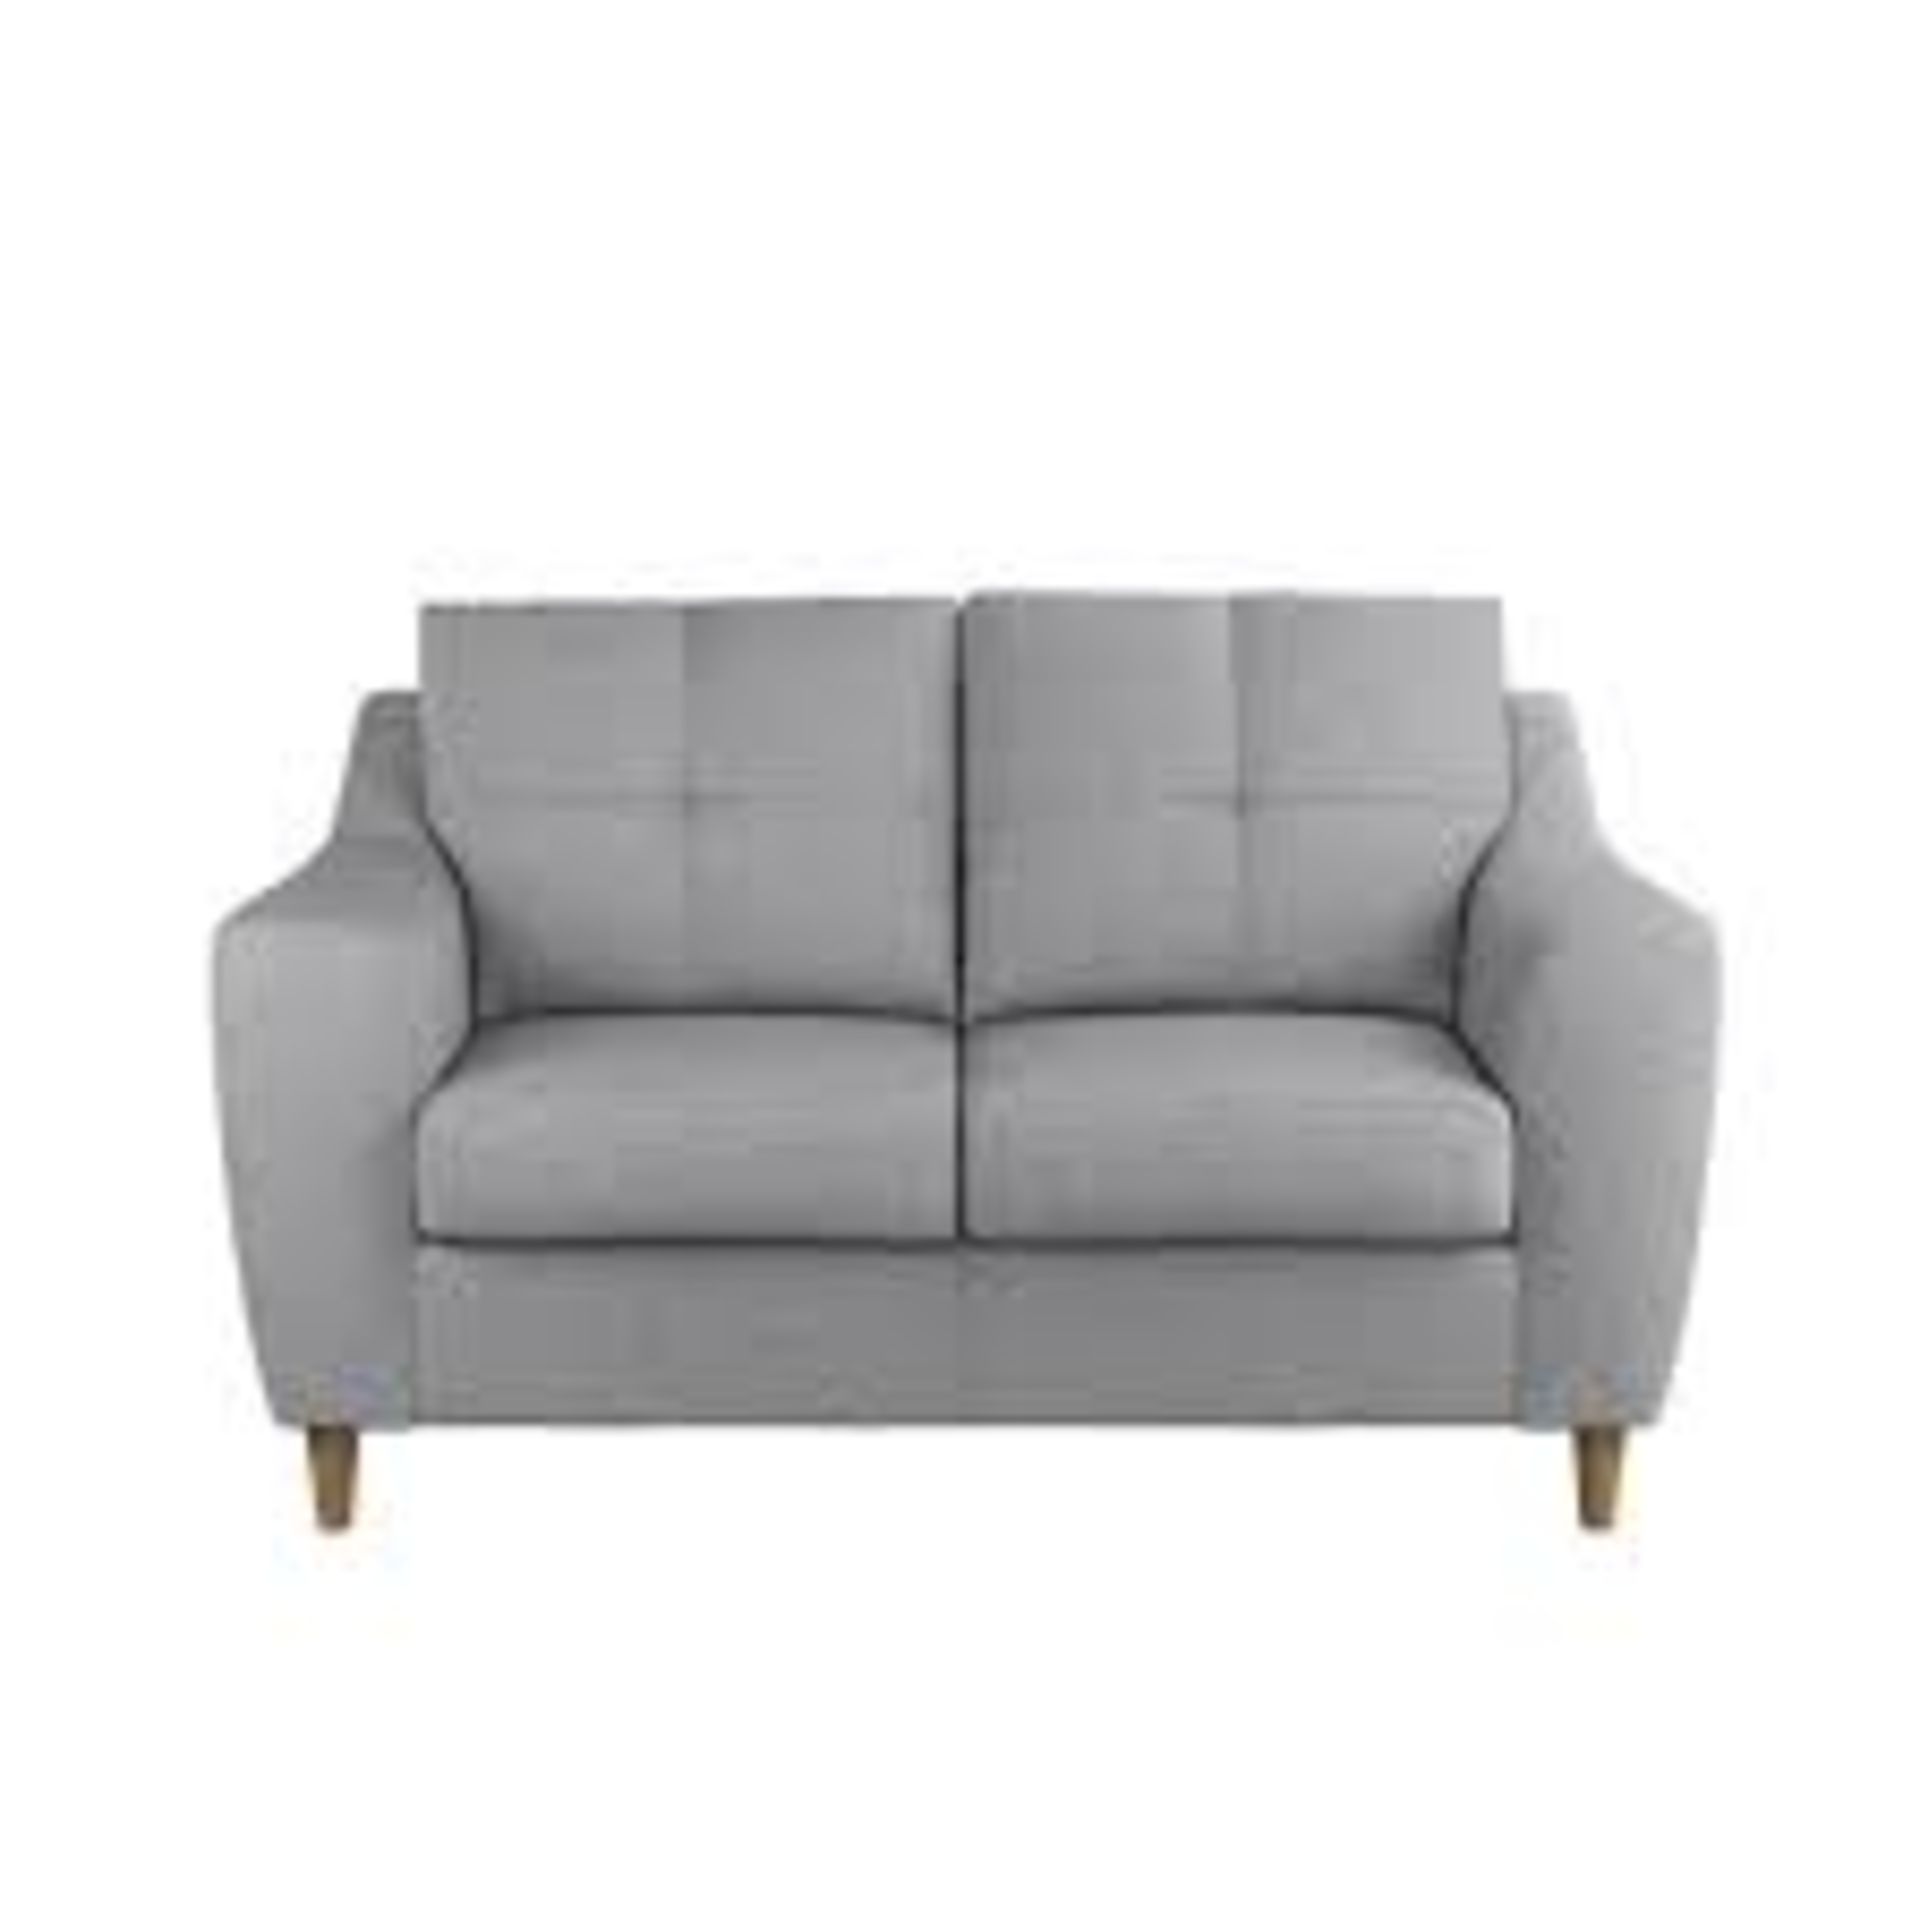 (REF118316) Baxter 2 Seater Sofa RRP 523.5